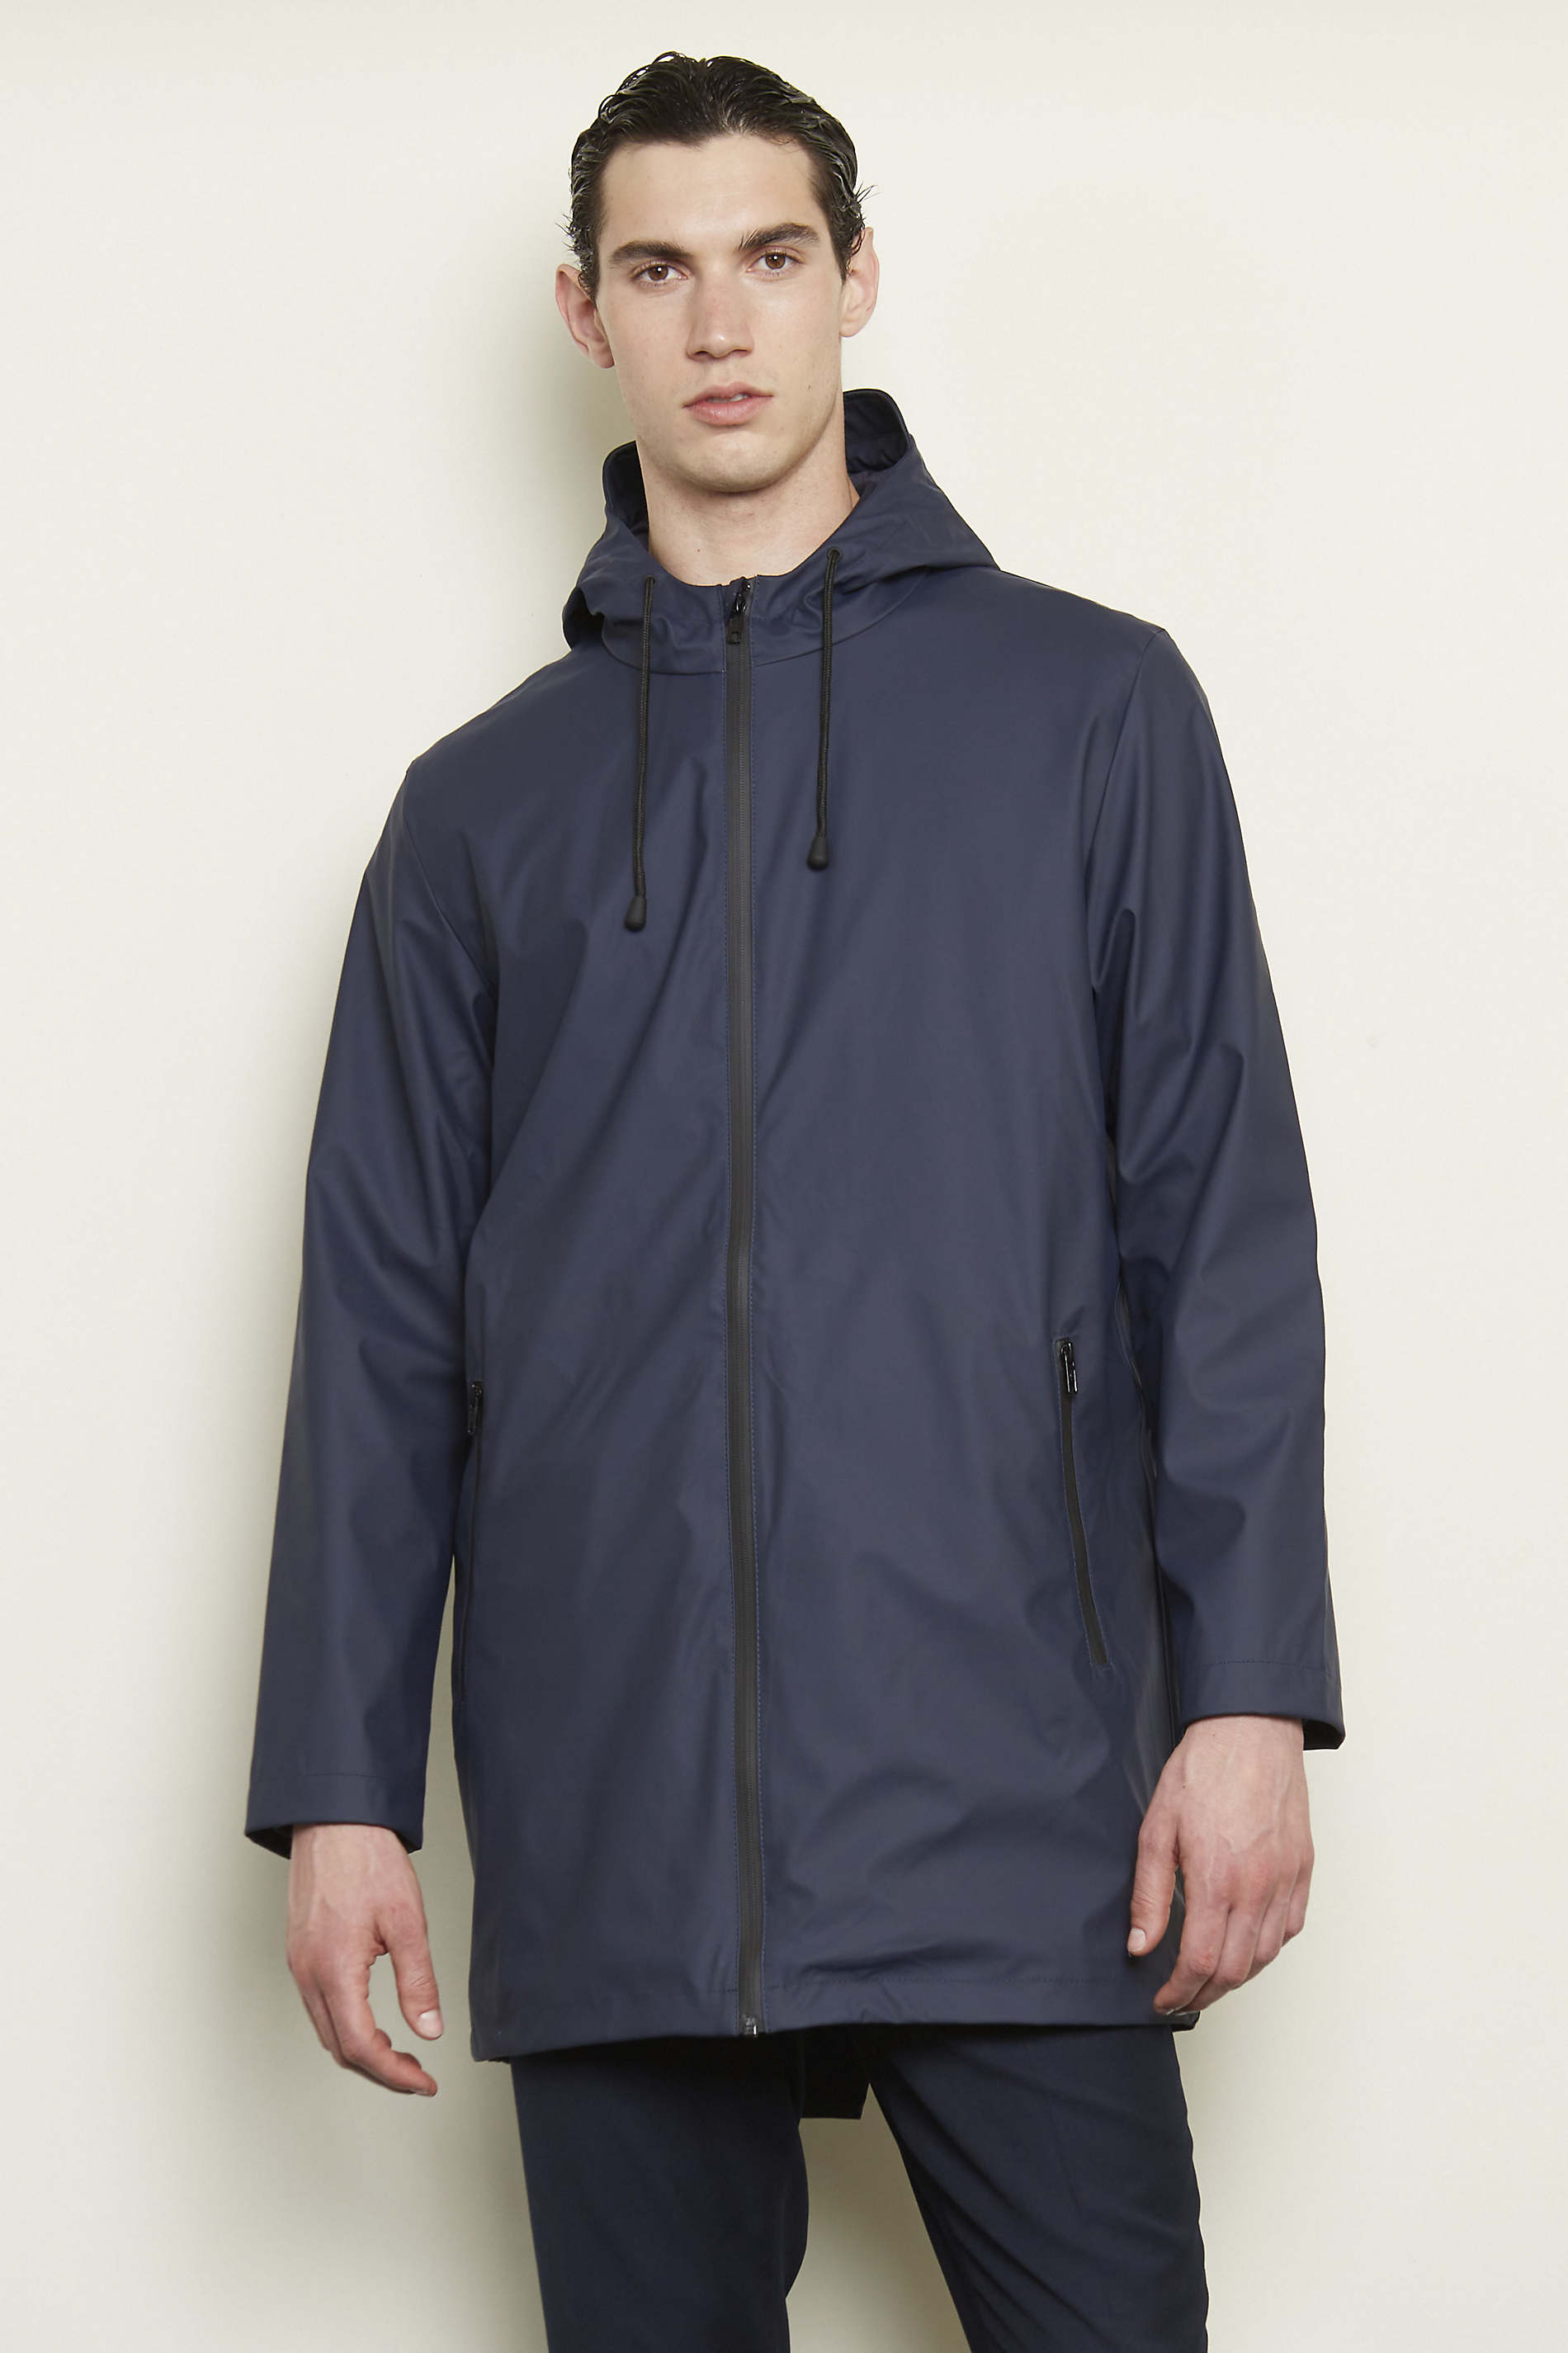 MEN'S WATERPROOF WAXED JACKET<p>This revisited waxed jacket is an iconic garment that combines performance and modernity. Its waterproof finishes make it perfectly impermeable and its matt look gives it a modern style.</p> NEOBLU ANTOINE MEN